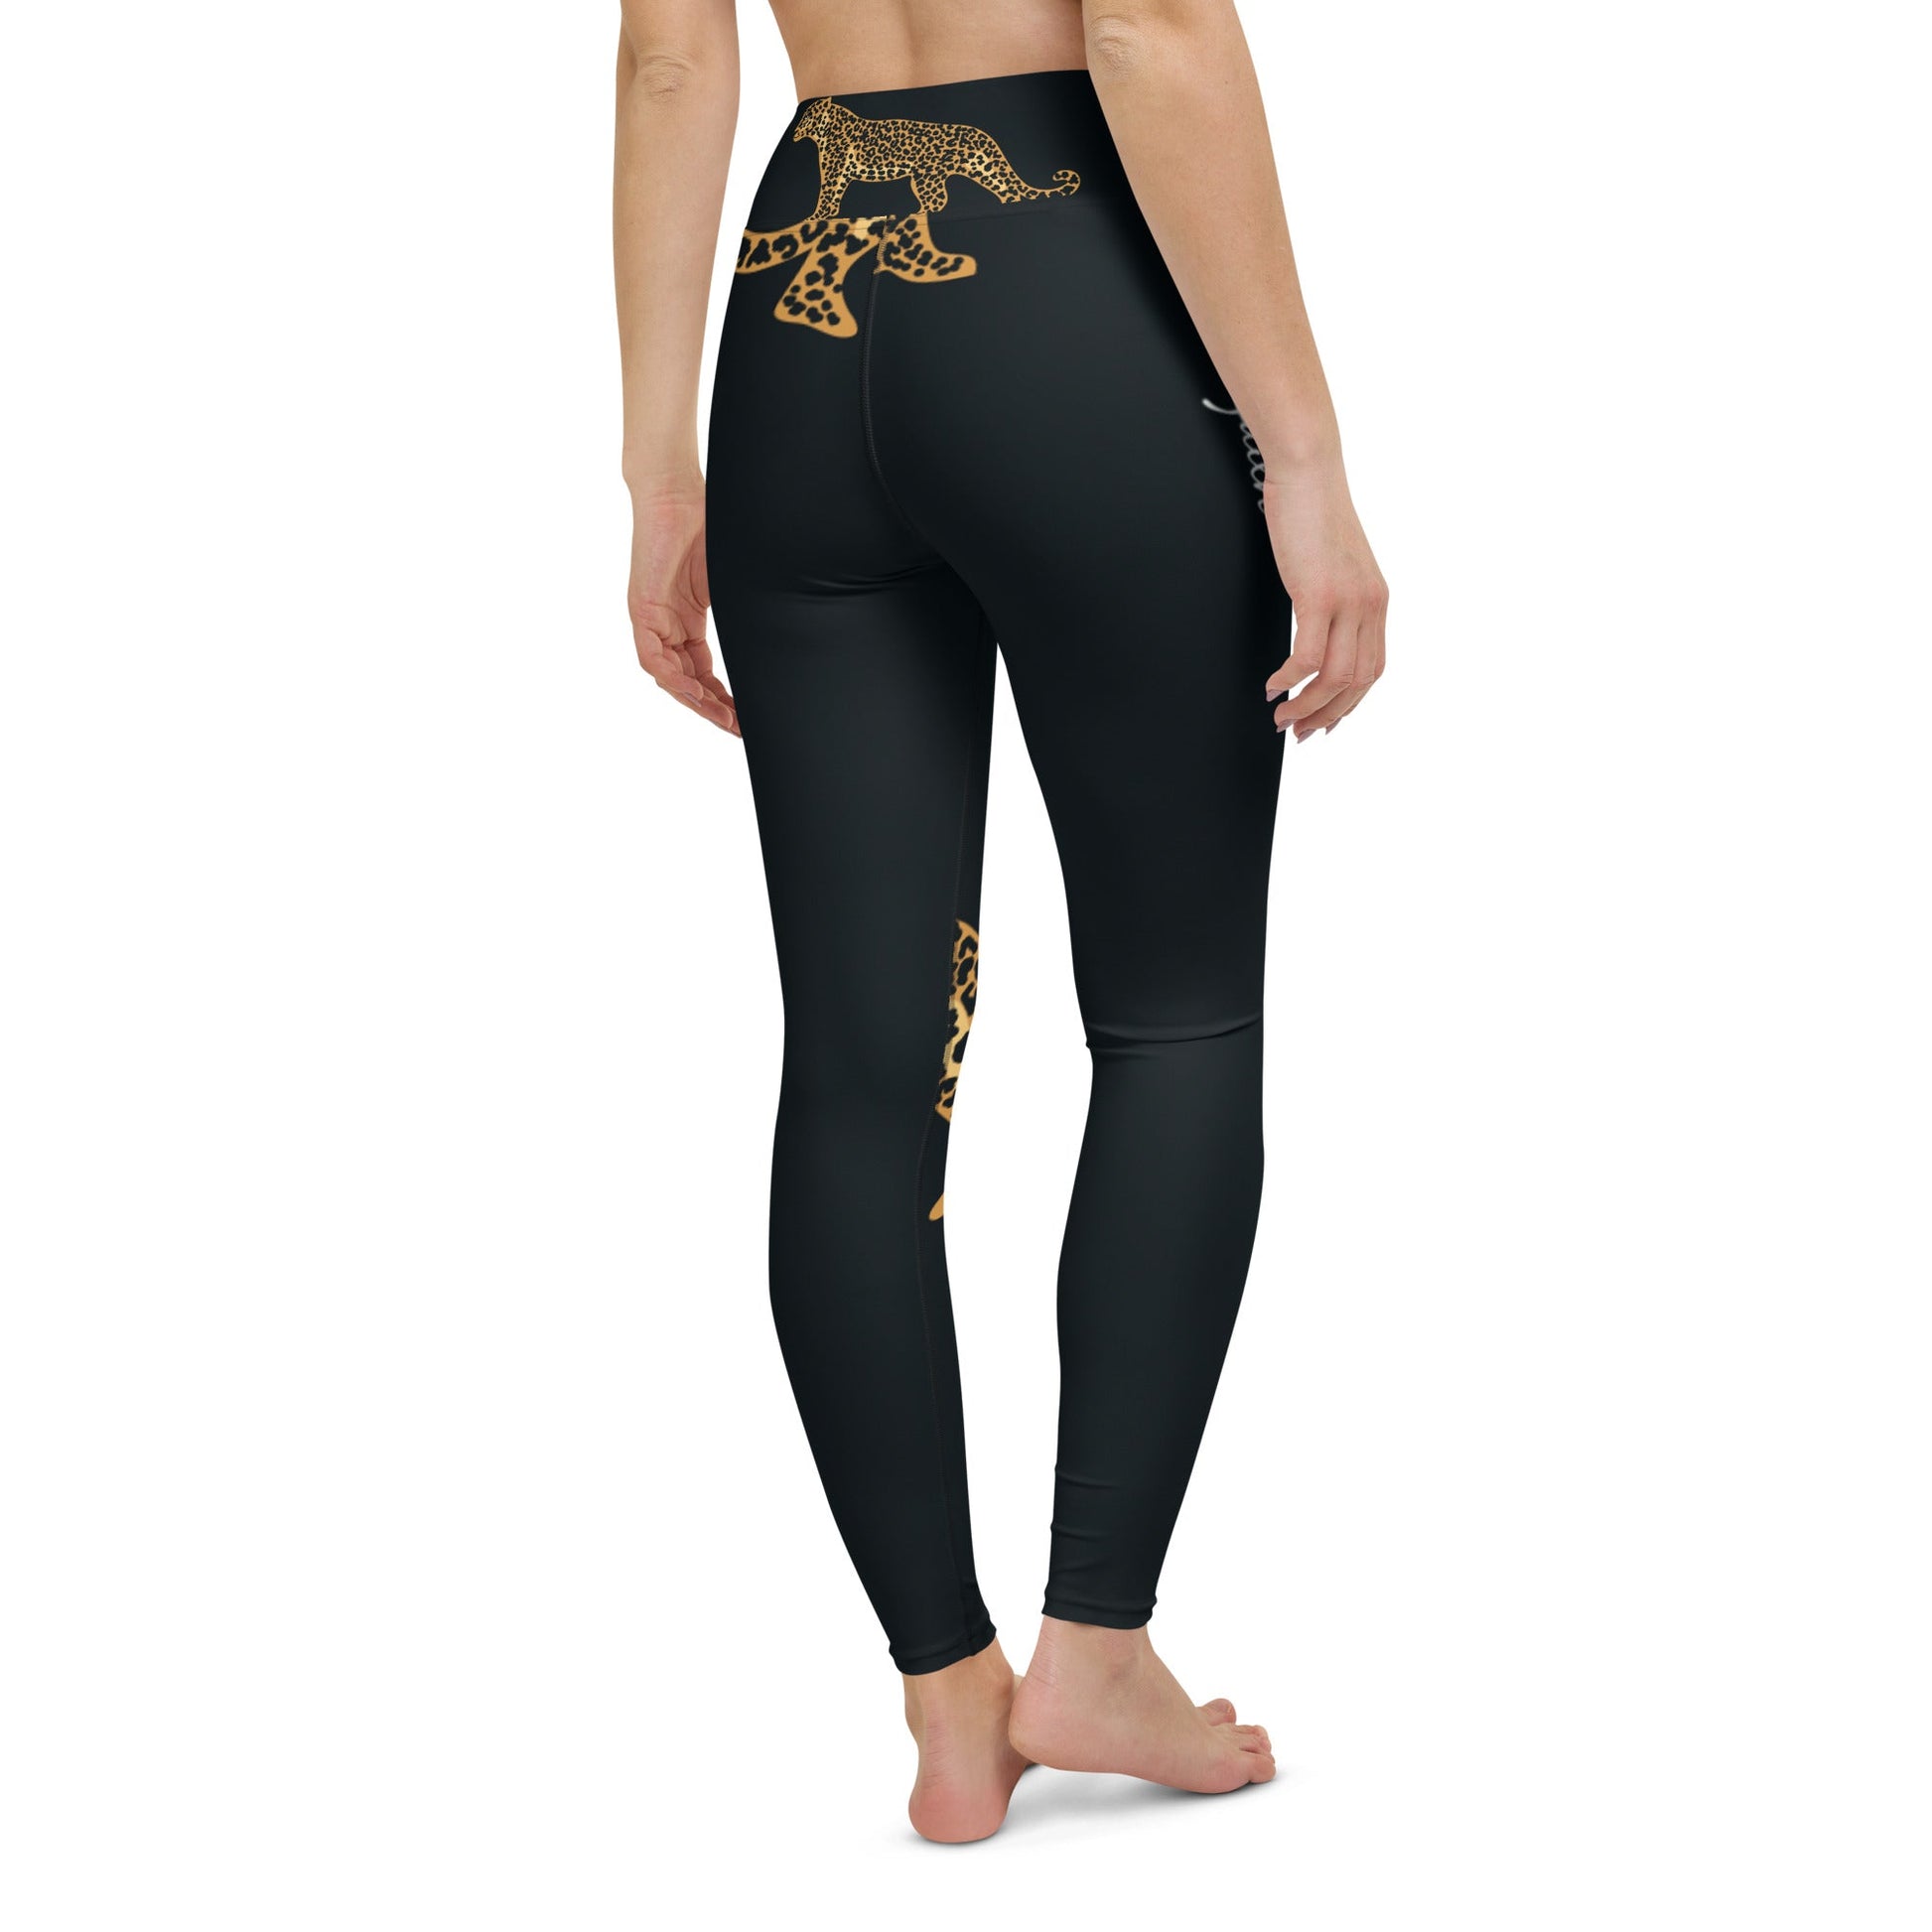 Leggings "Jesus is Lord, whether you believe it or not!" Leopard Print - faithbook